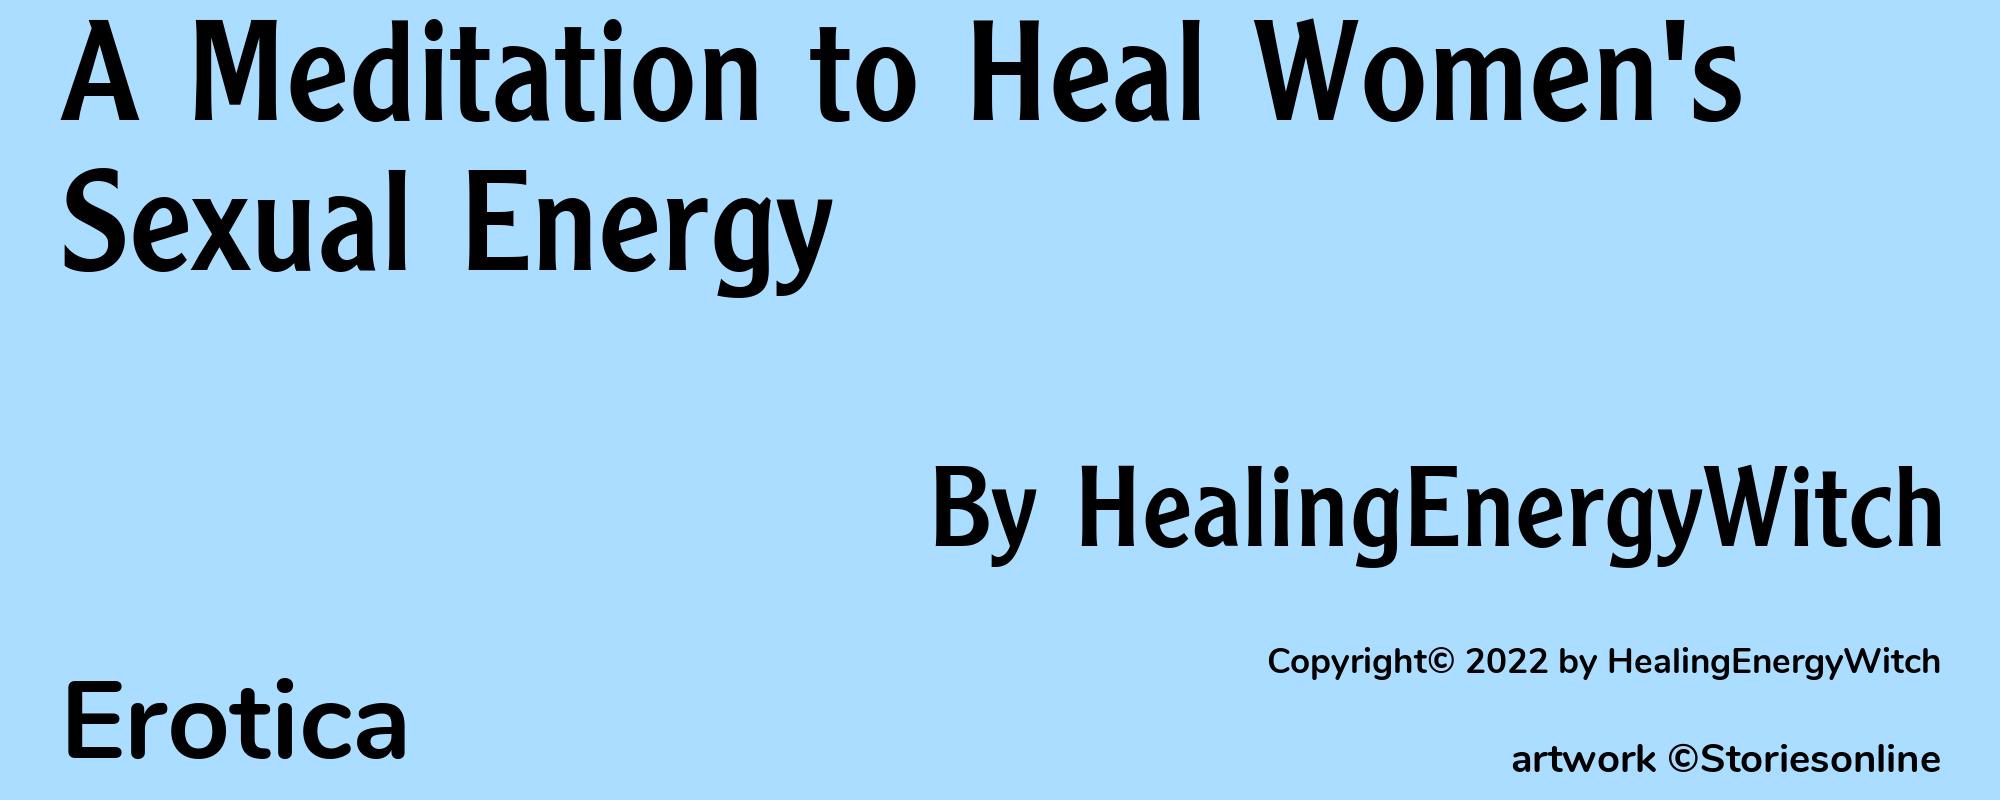 A Meditation to Heal Women's Sexual Energy - Cover